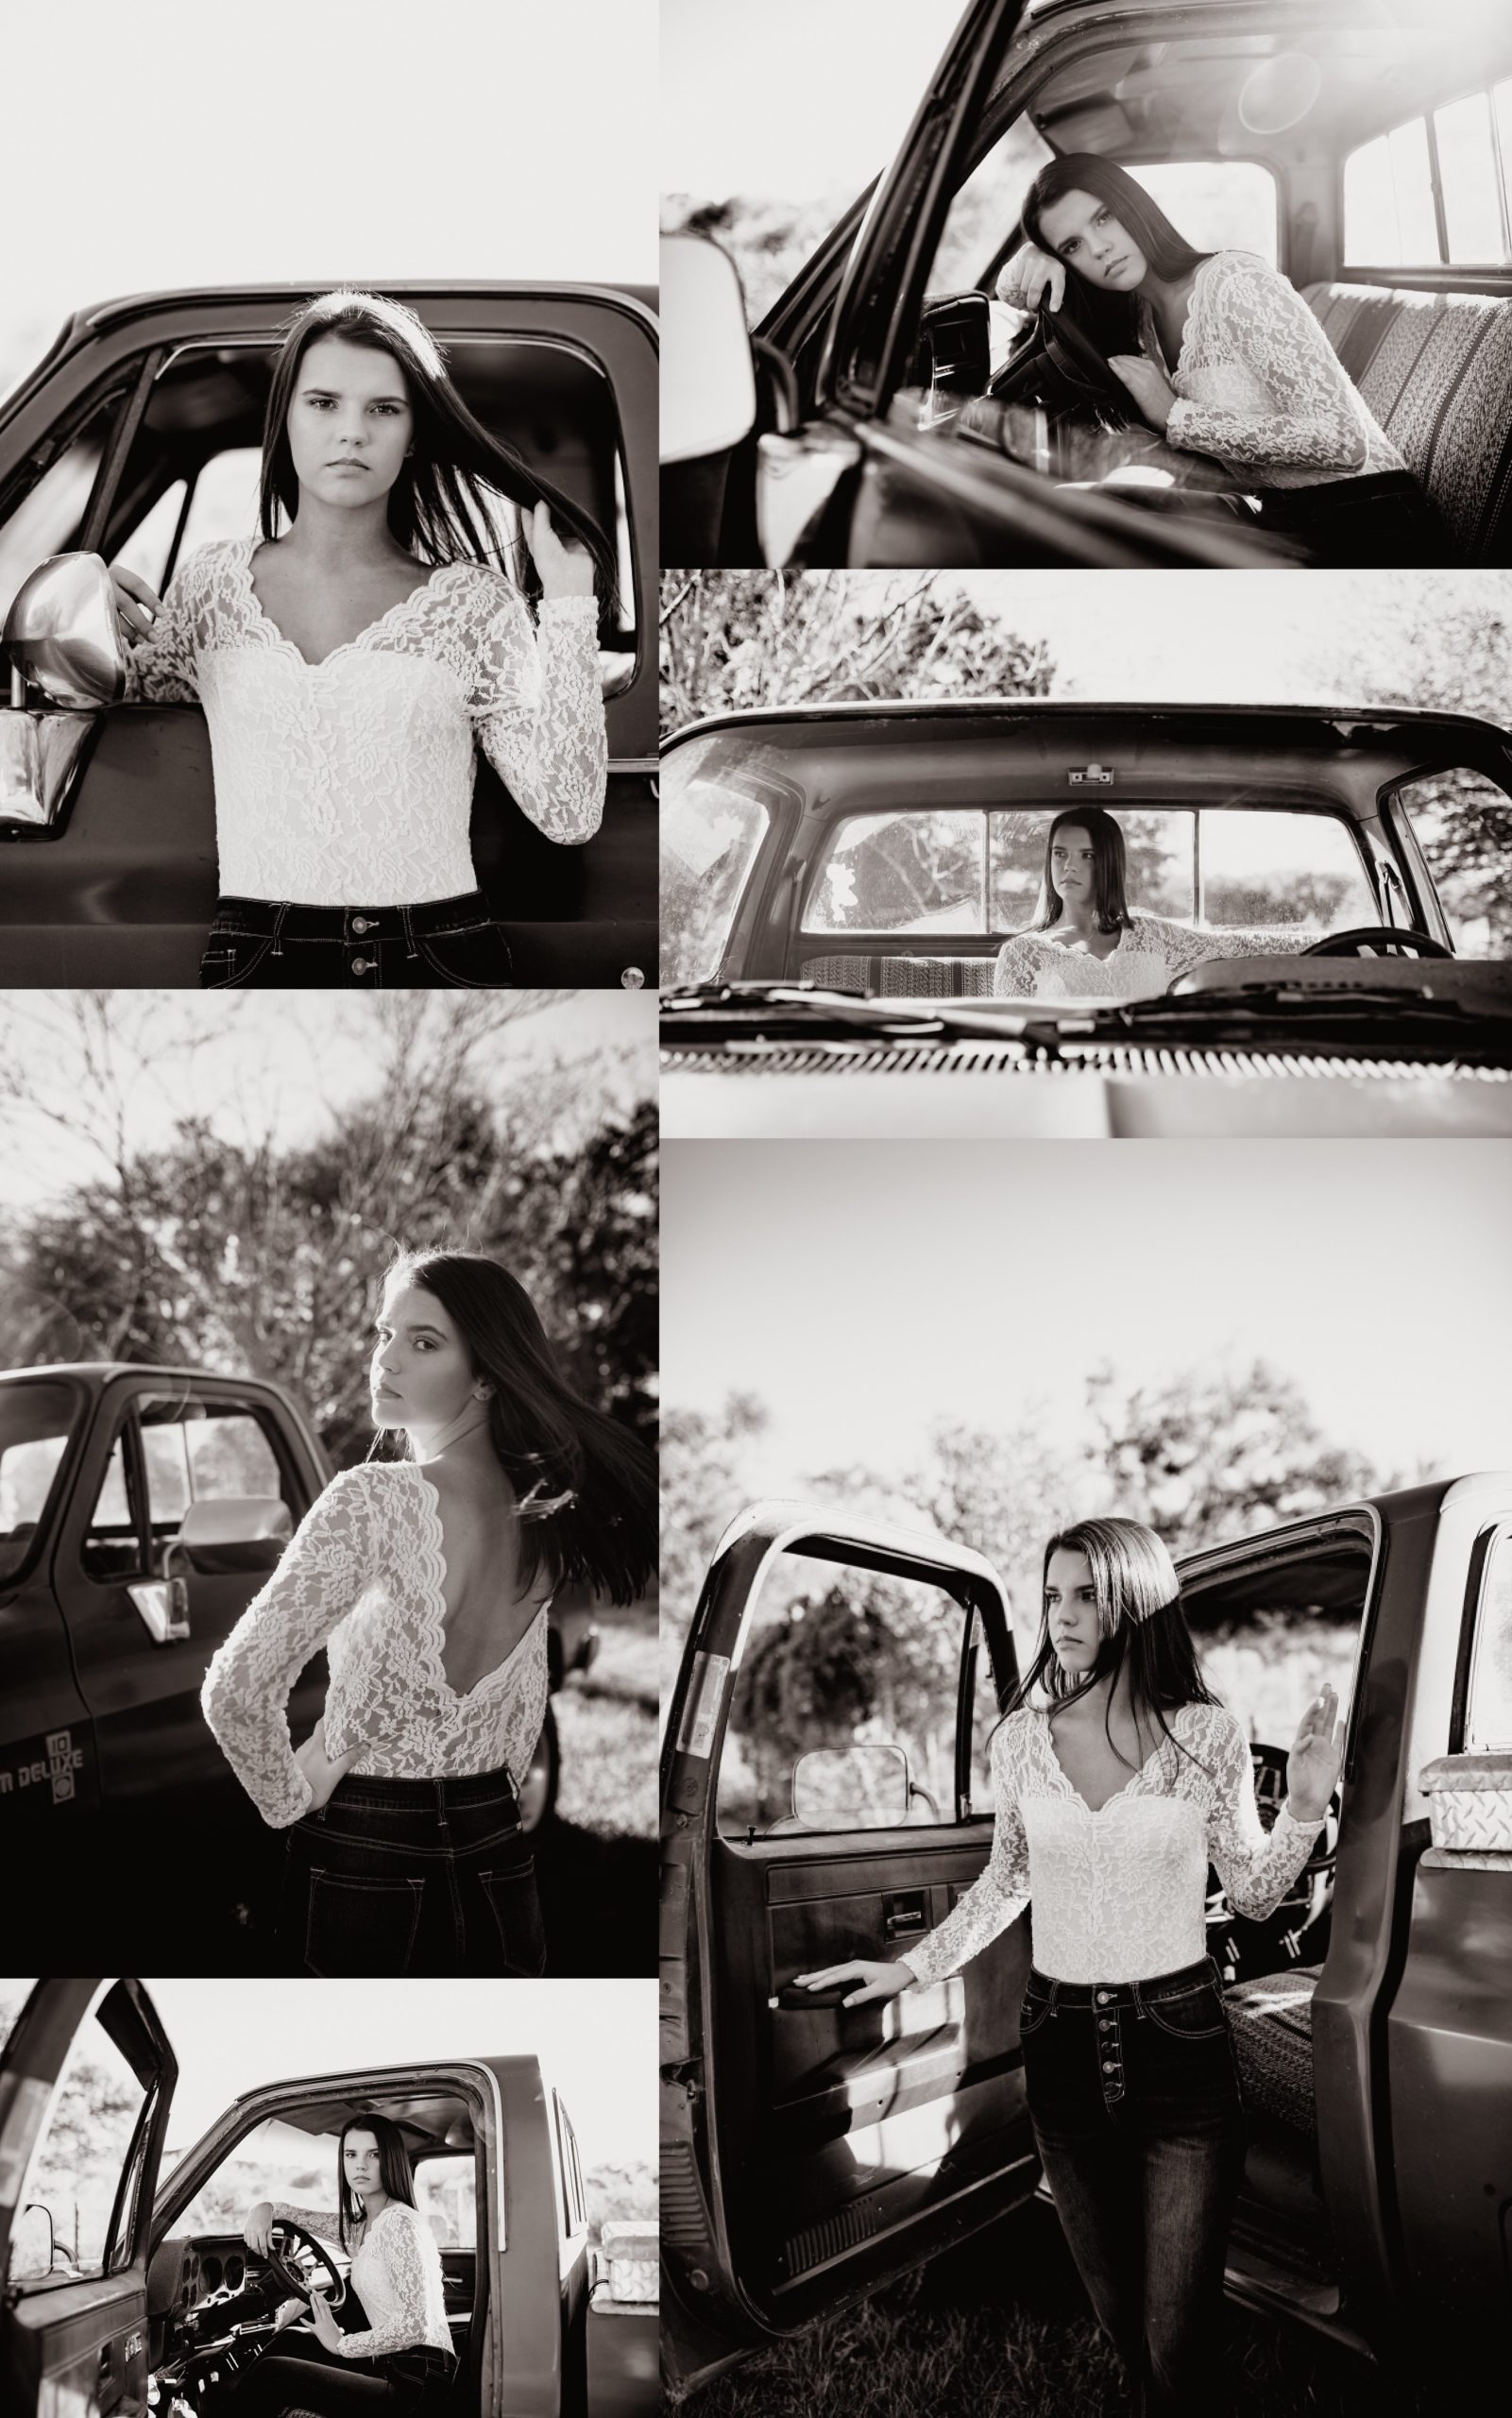 Senior takes pictures with an old truck in black and white.